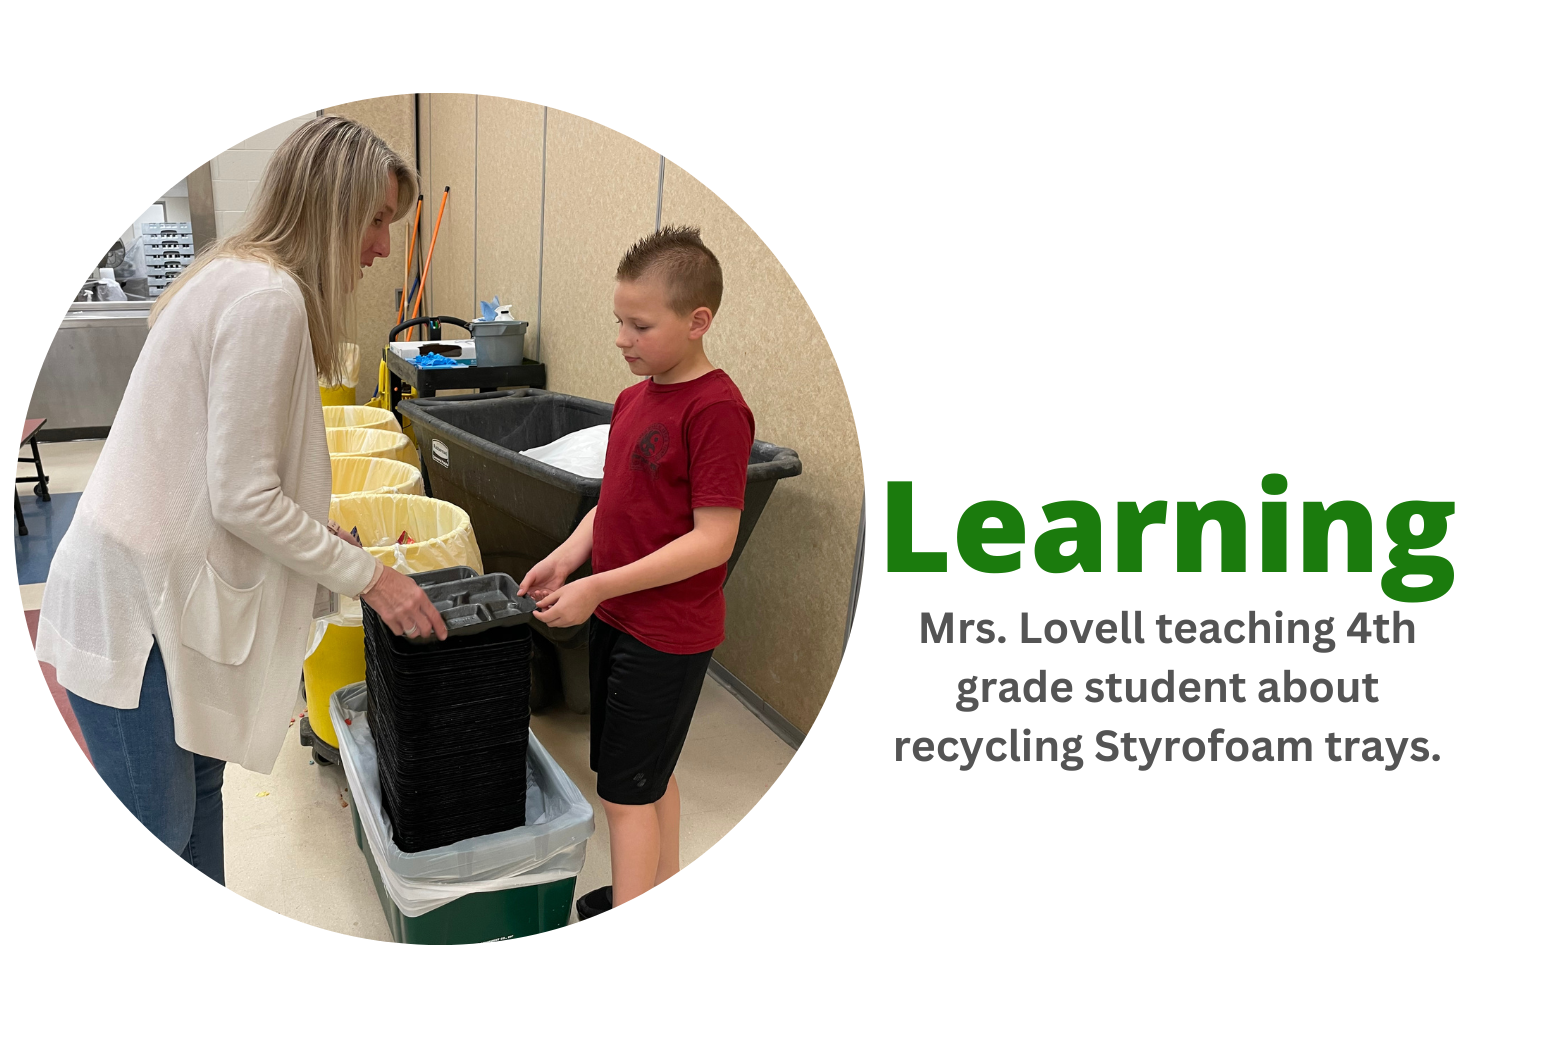 Learning - Recycling